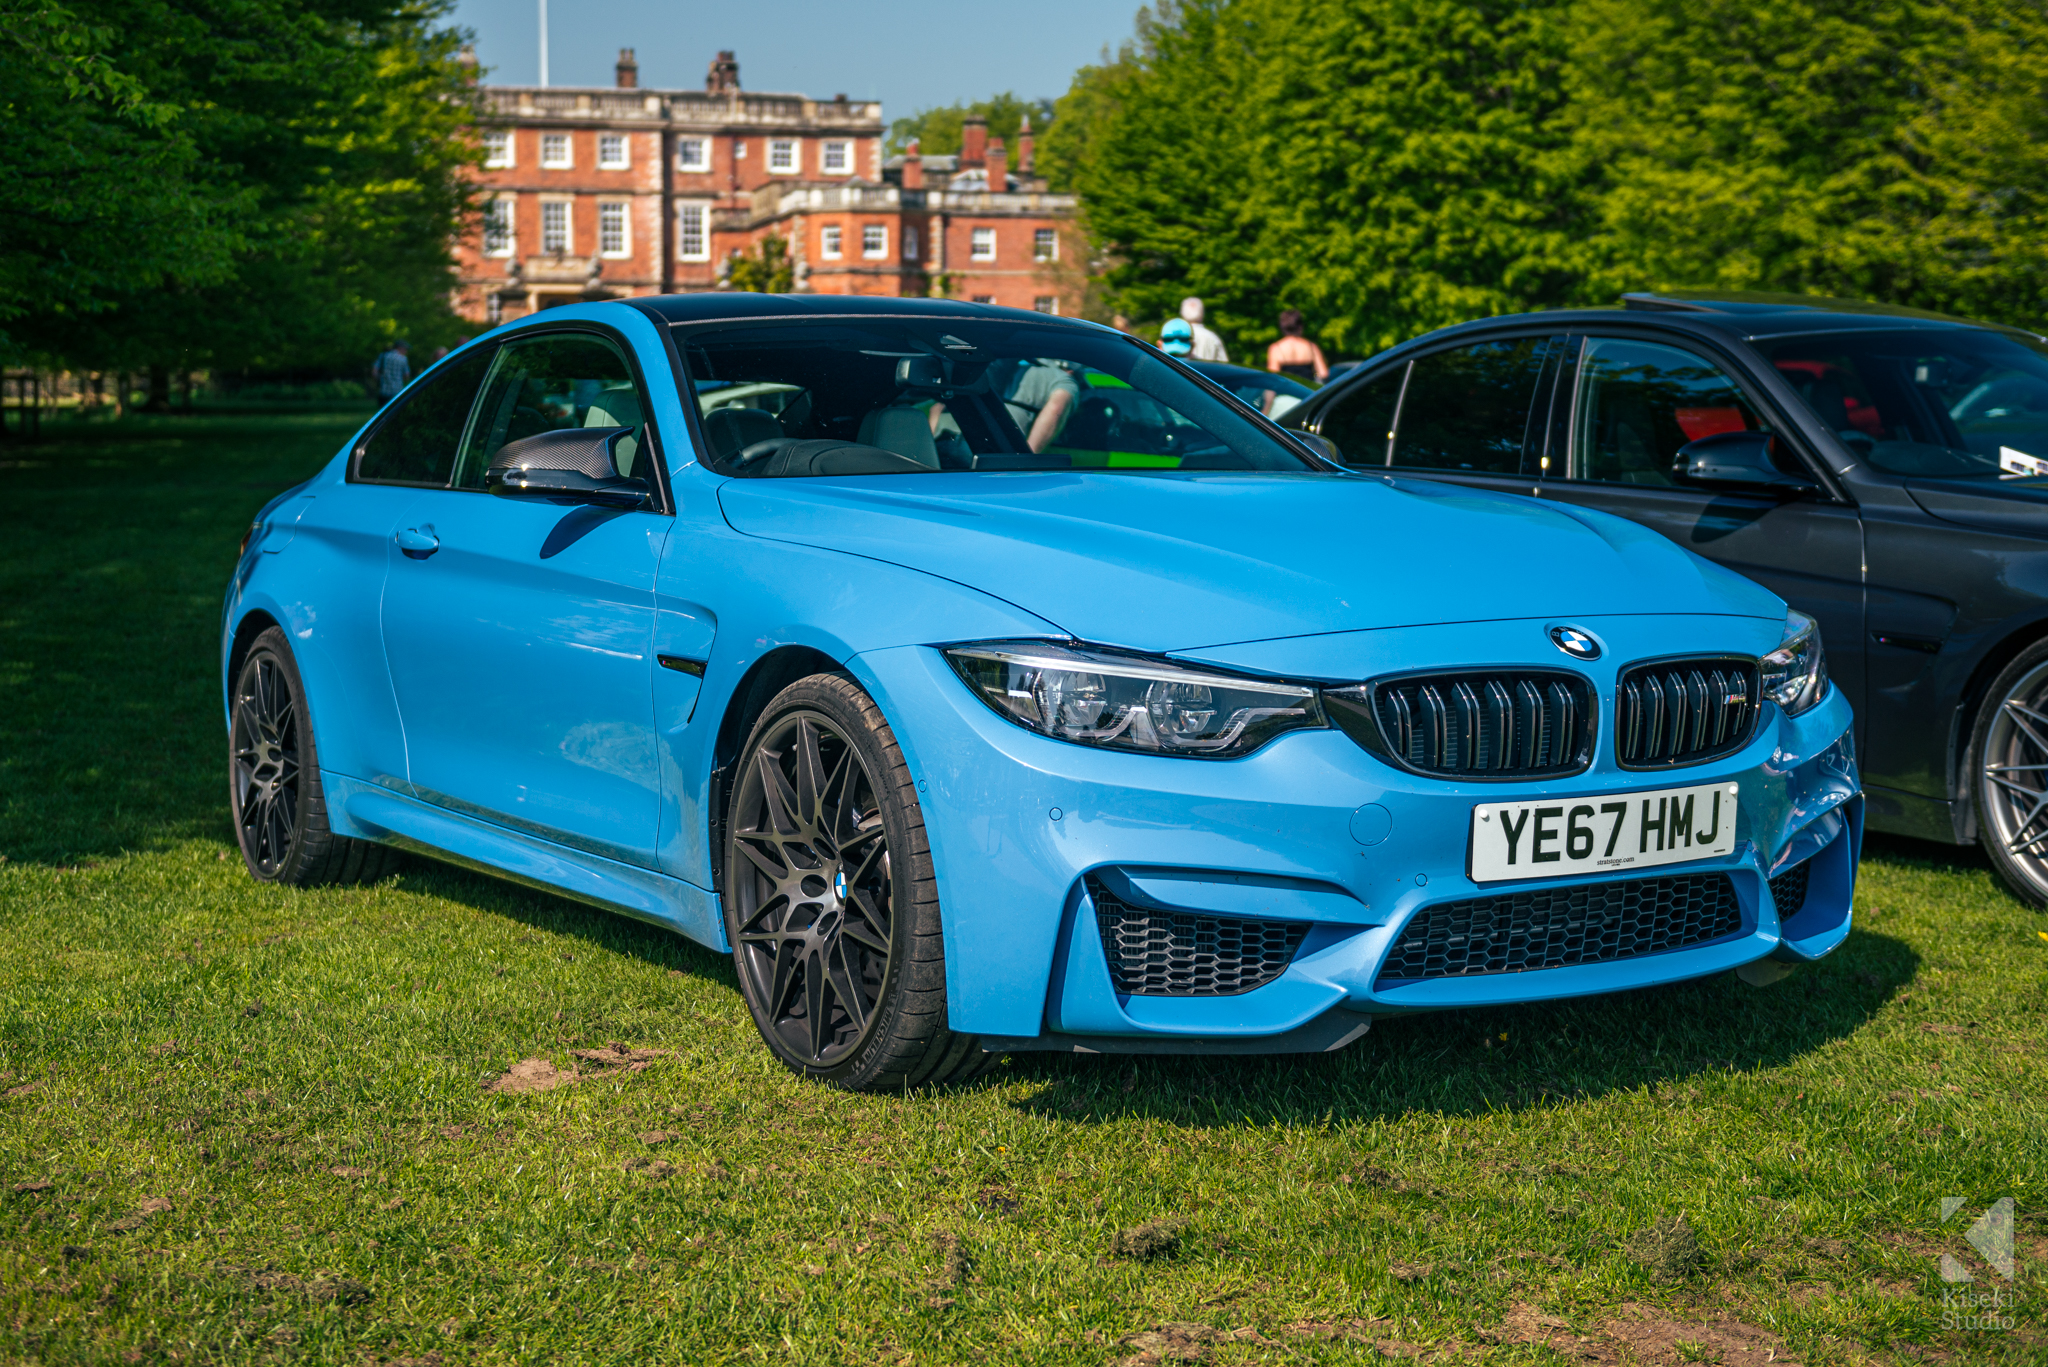 sportscars-in-the-park-bmw-m4-blue-competition